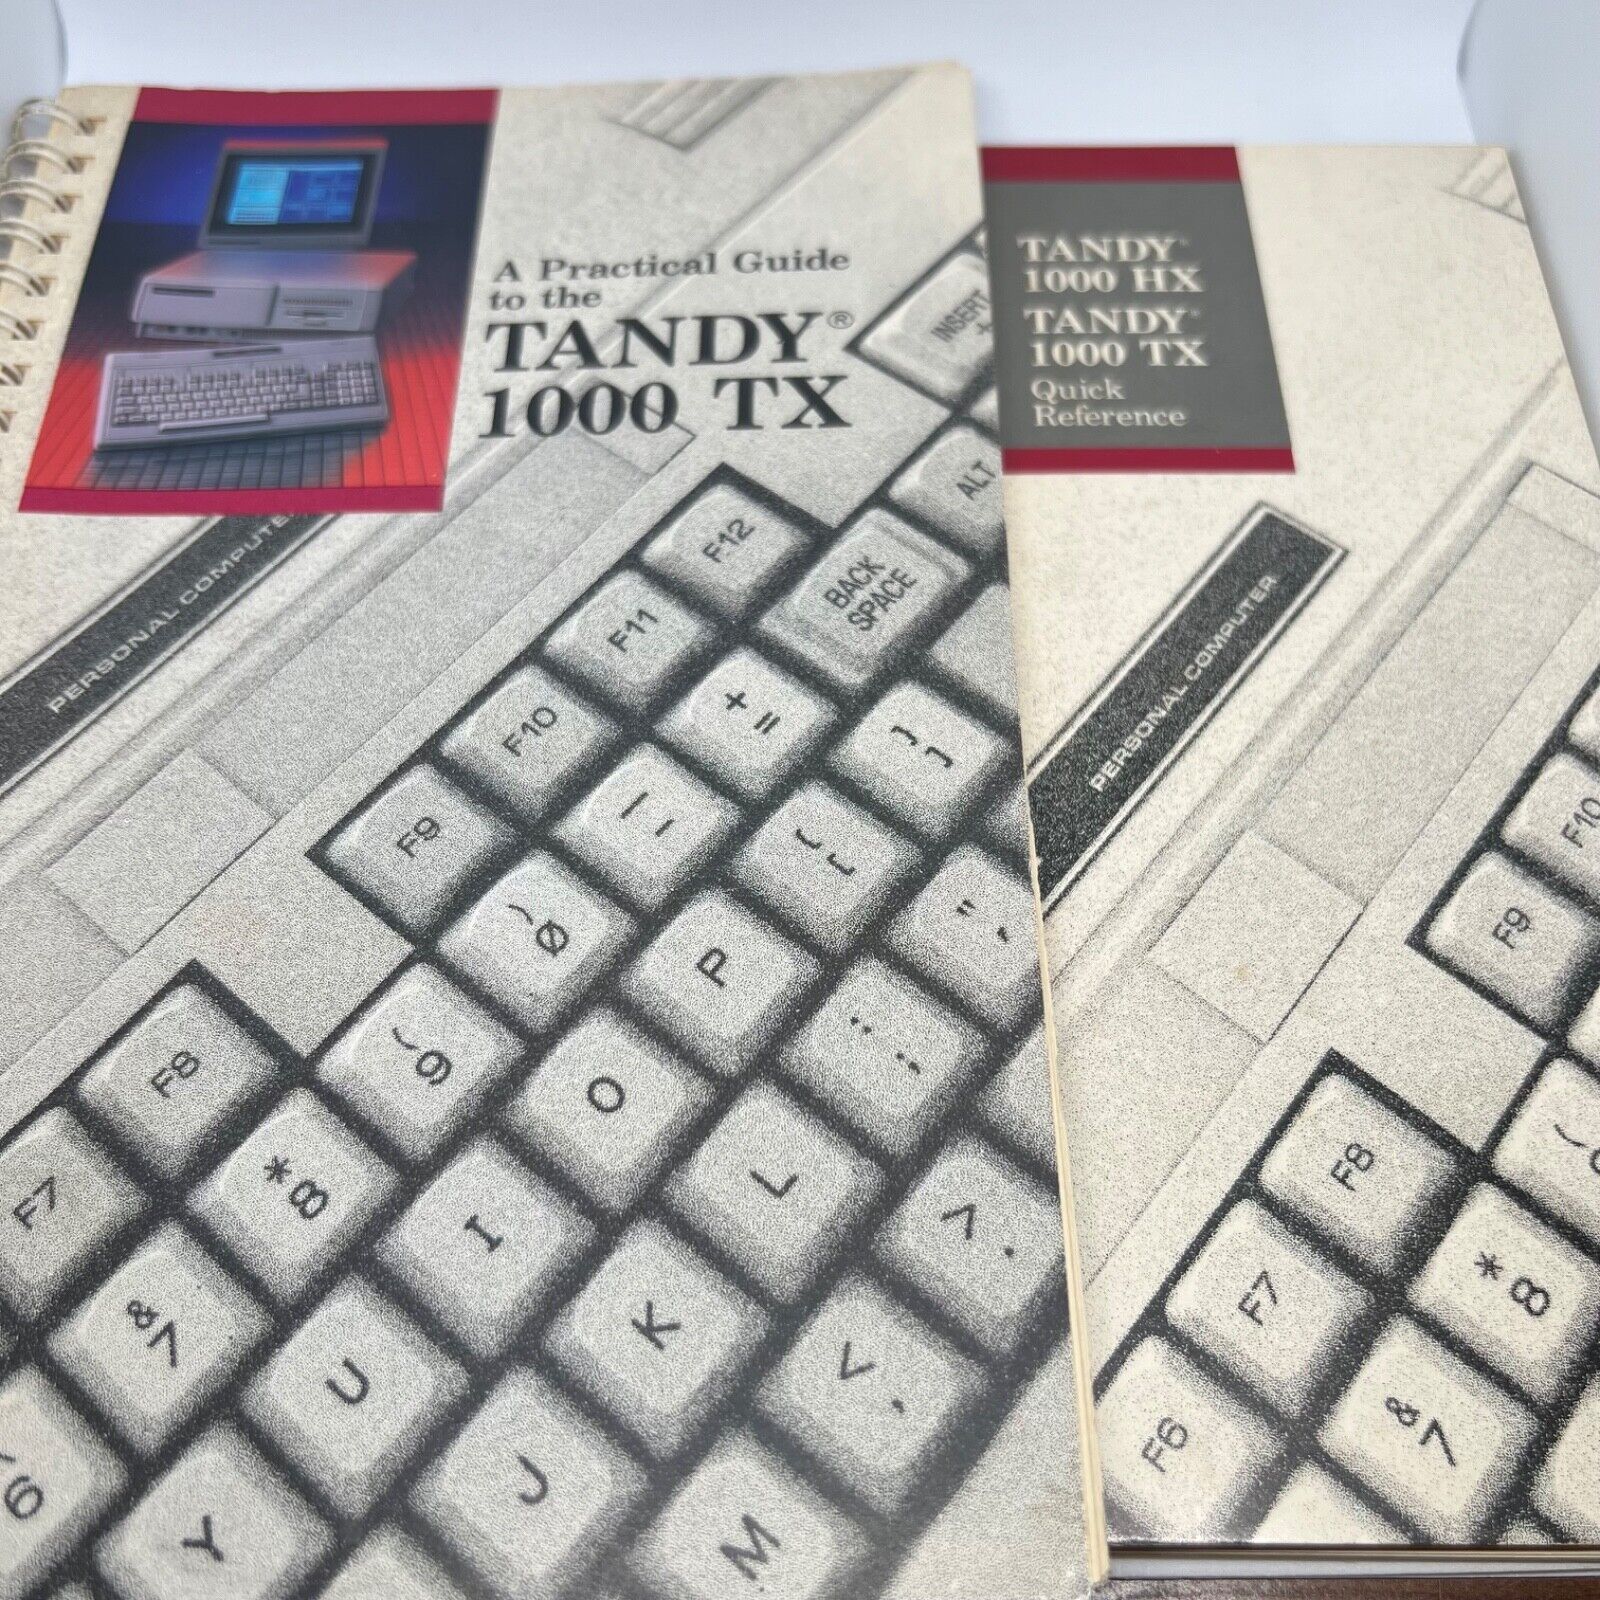 TANDY 1000 TX  Practical Guide & Quick Reference Manual Bundle 1987 Radio Shack